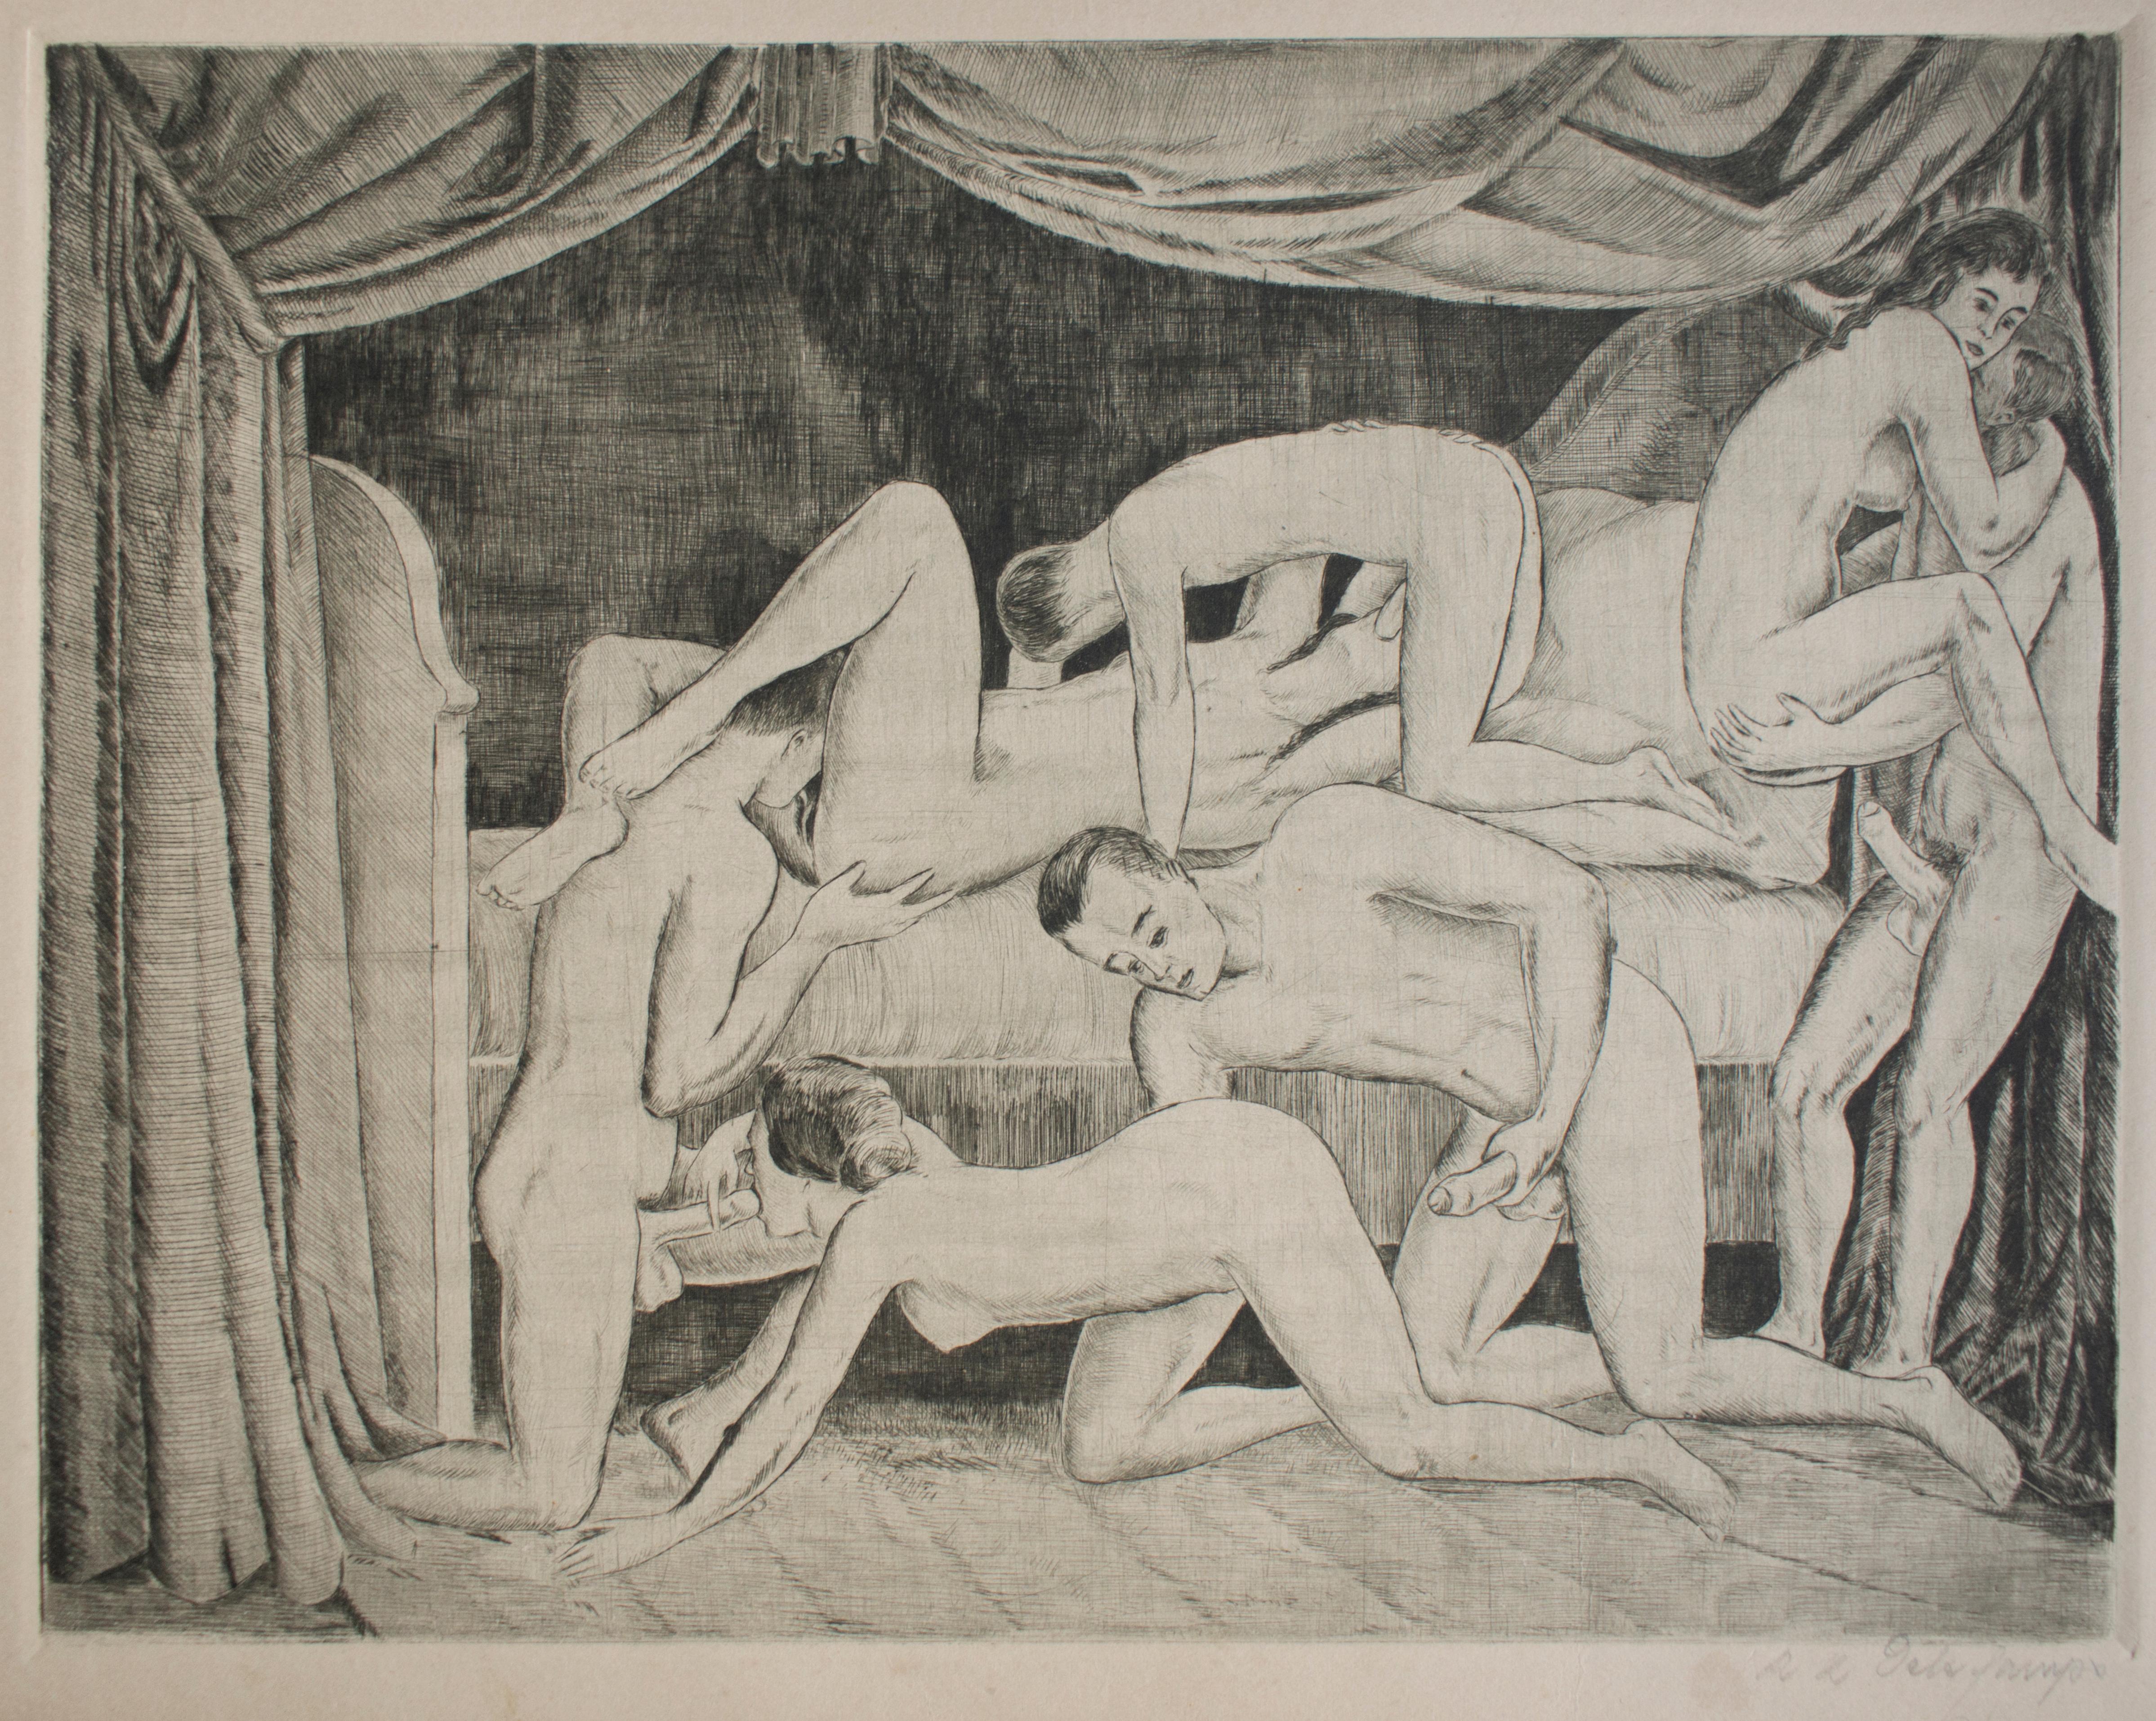 Realized by an anonymous artist under the pseudonym of R.L. Delechamps, La Bible Noire is considered one of the masterpieces of XX century pornographic art.
Though it states to be printed in Paris in 1921, it was probably issued in Berlin in the